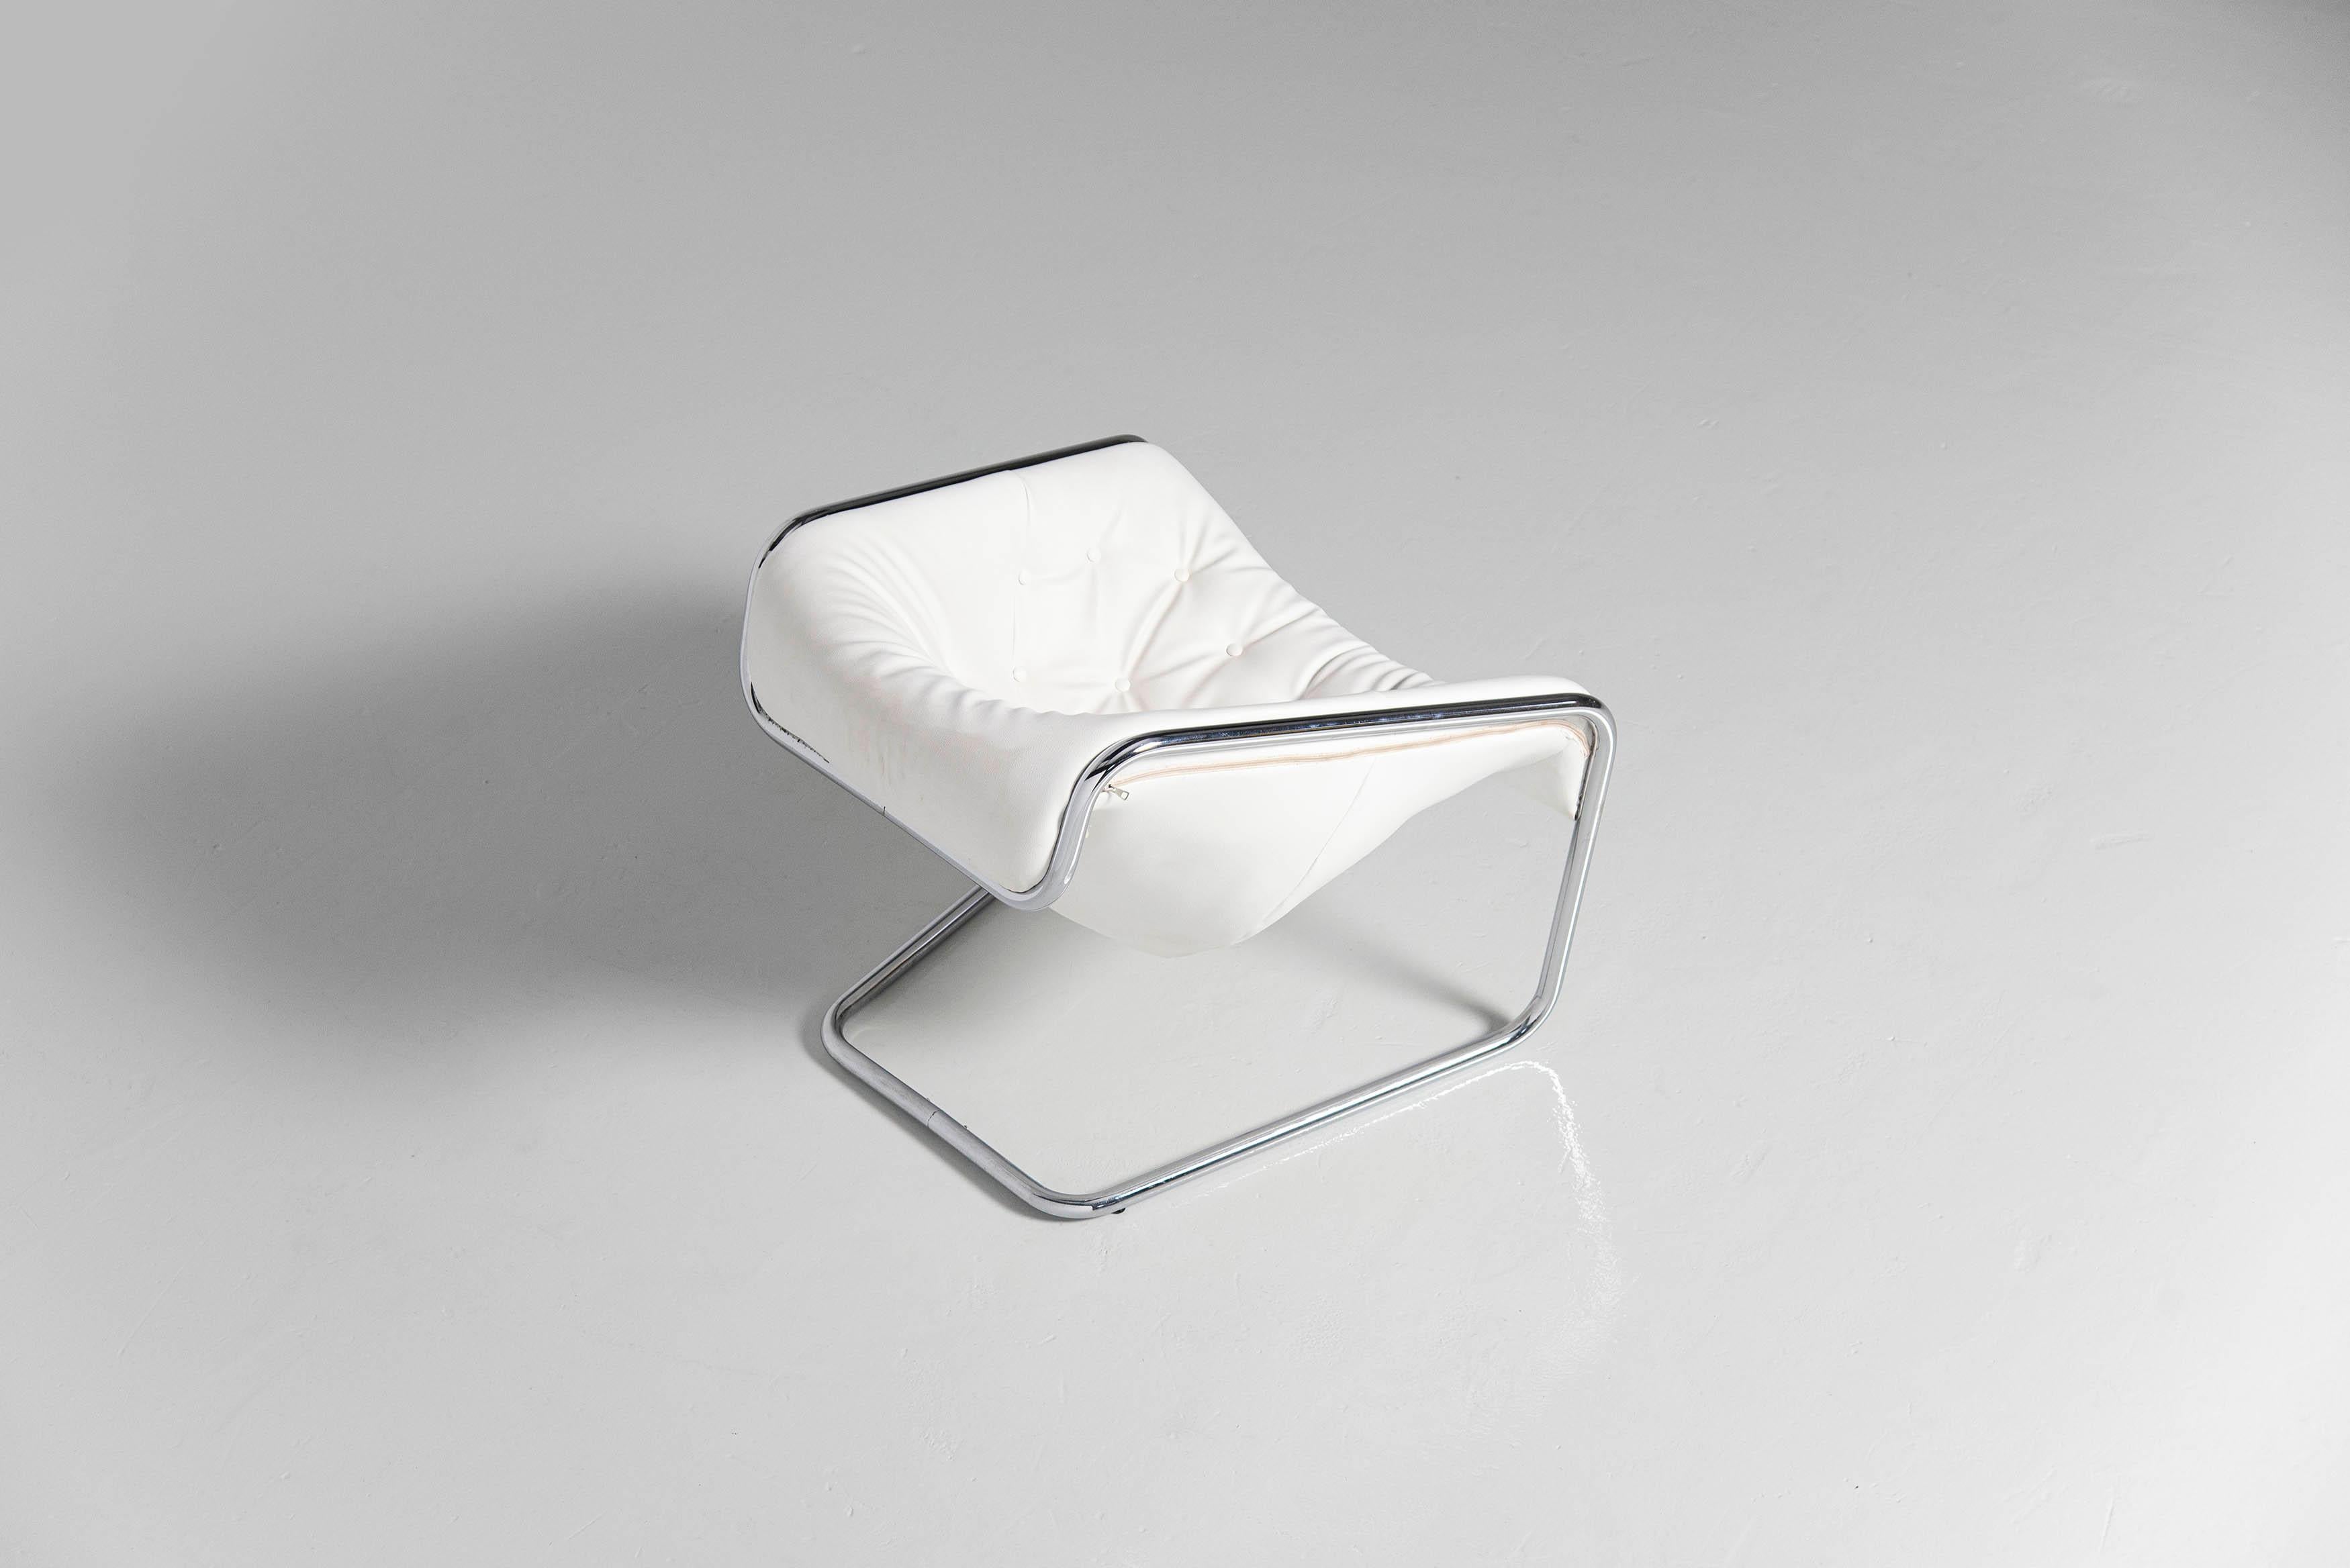 Late 20th Century Kwok Hoi Chan Boxer Chair Steiner, France, 1971